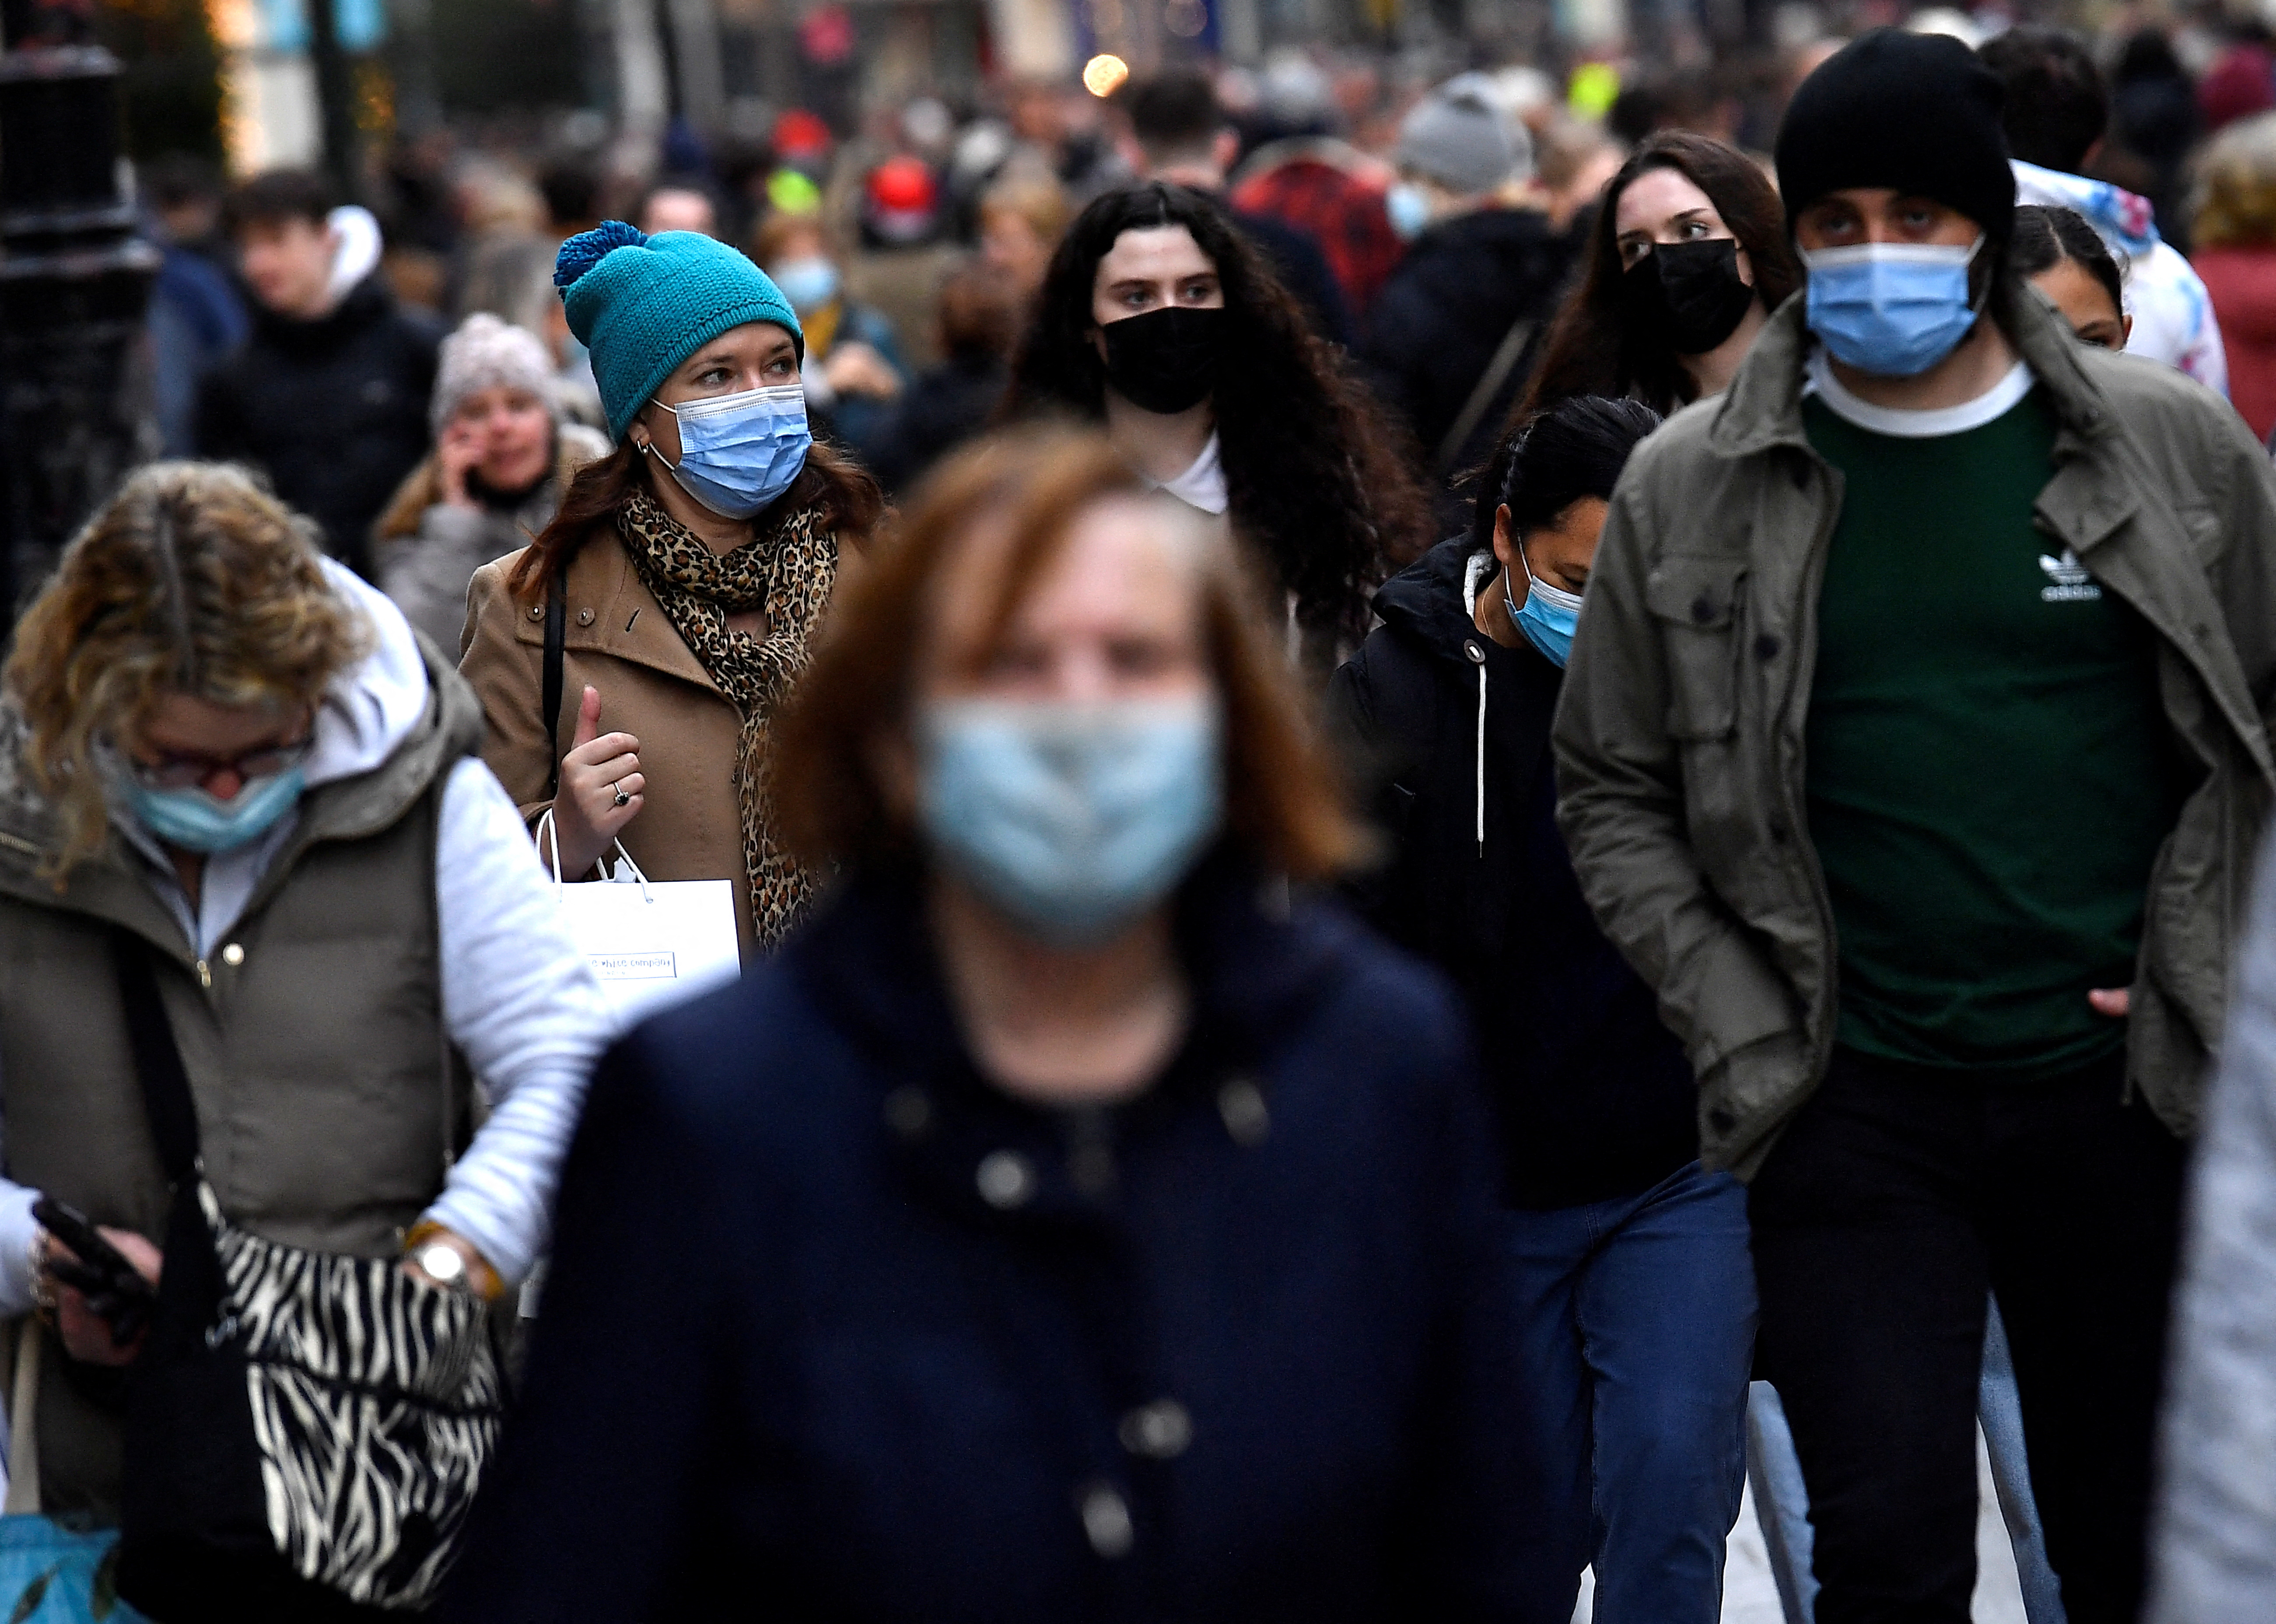 People wear protective face masks while out for Christmas shopping in Dublin